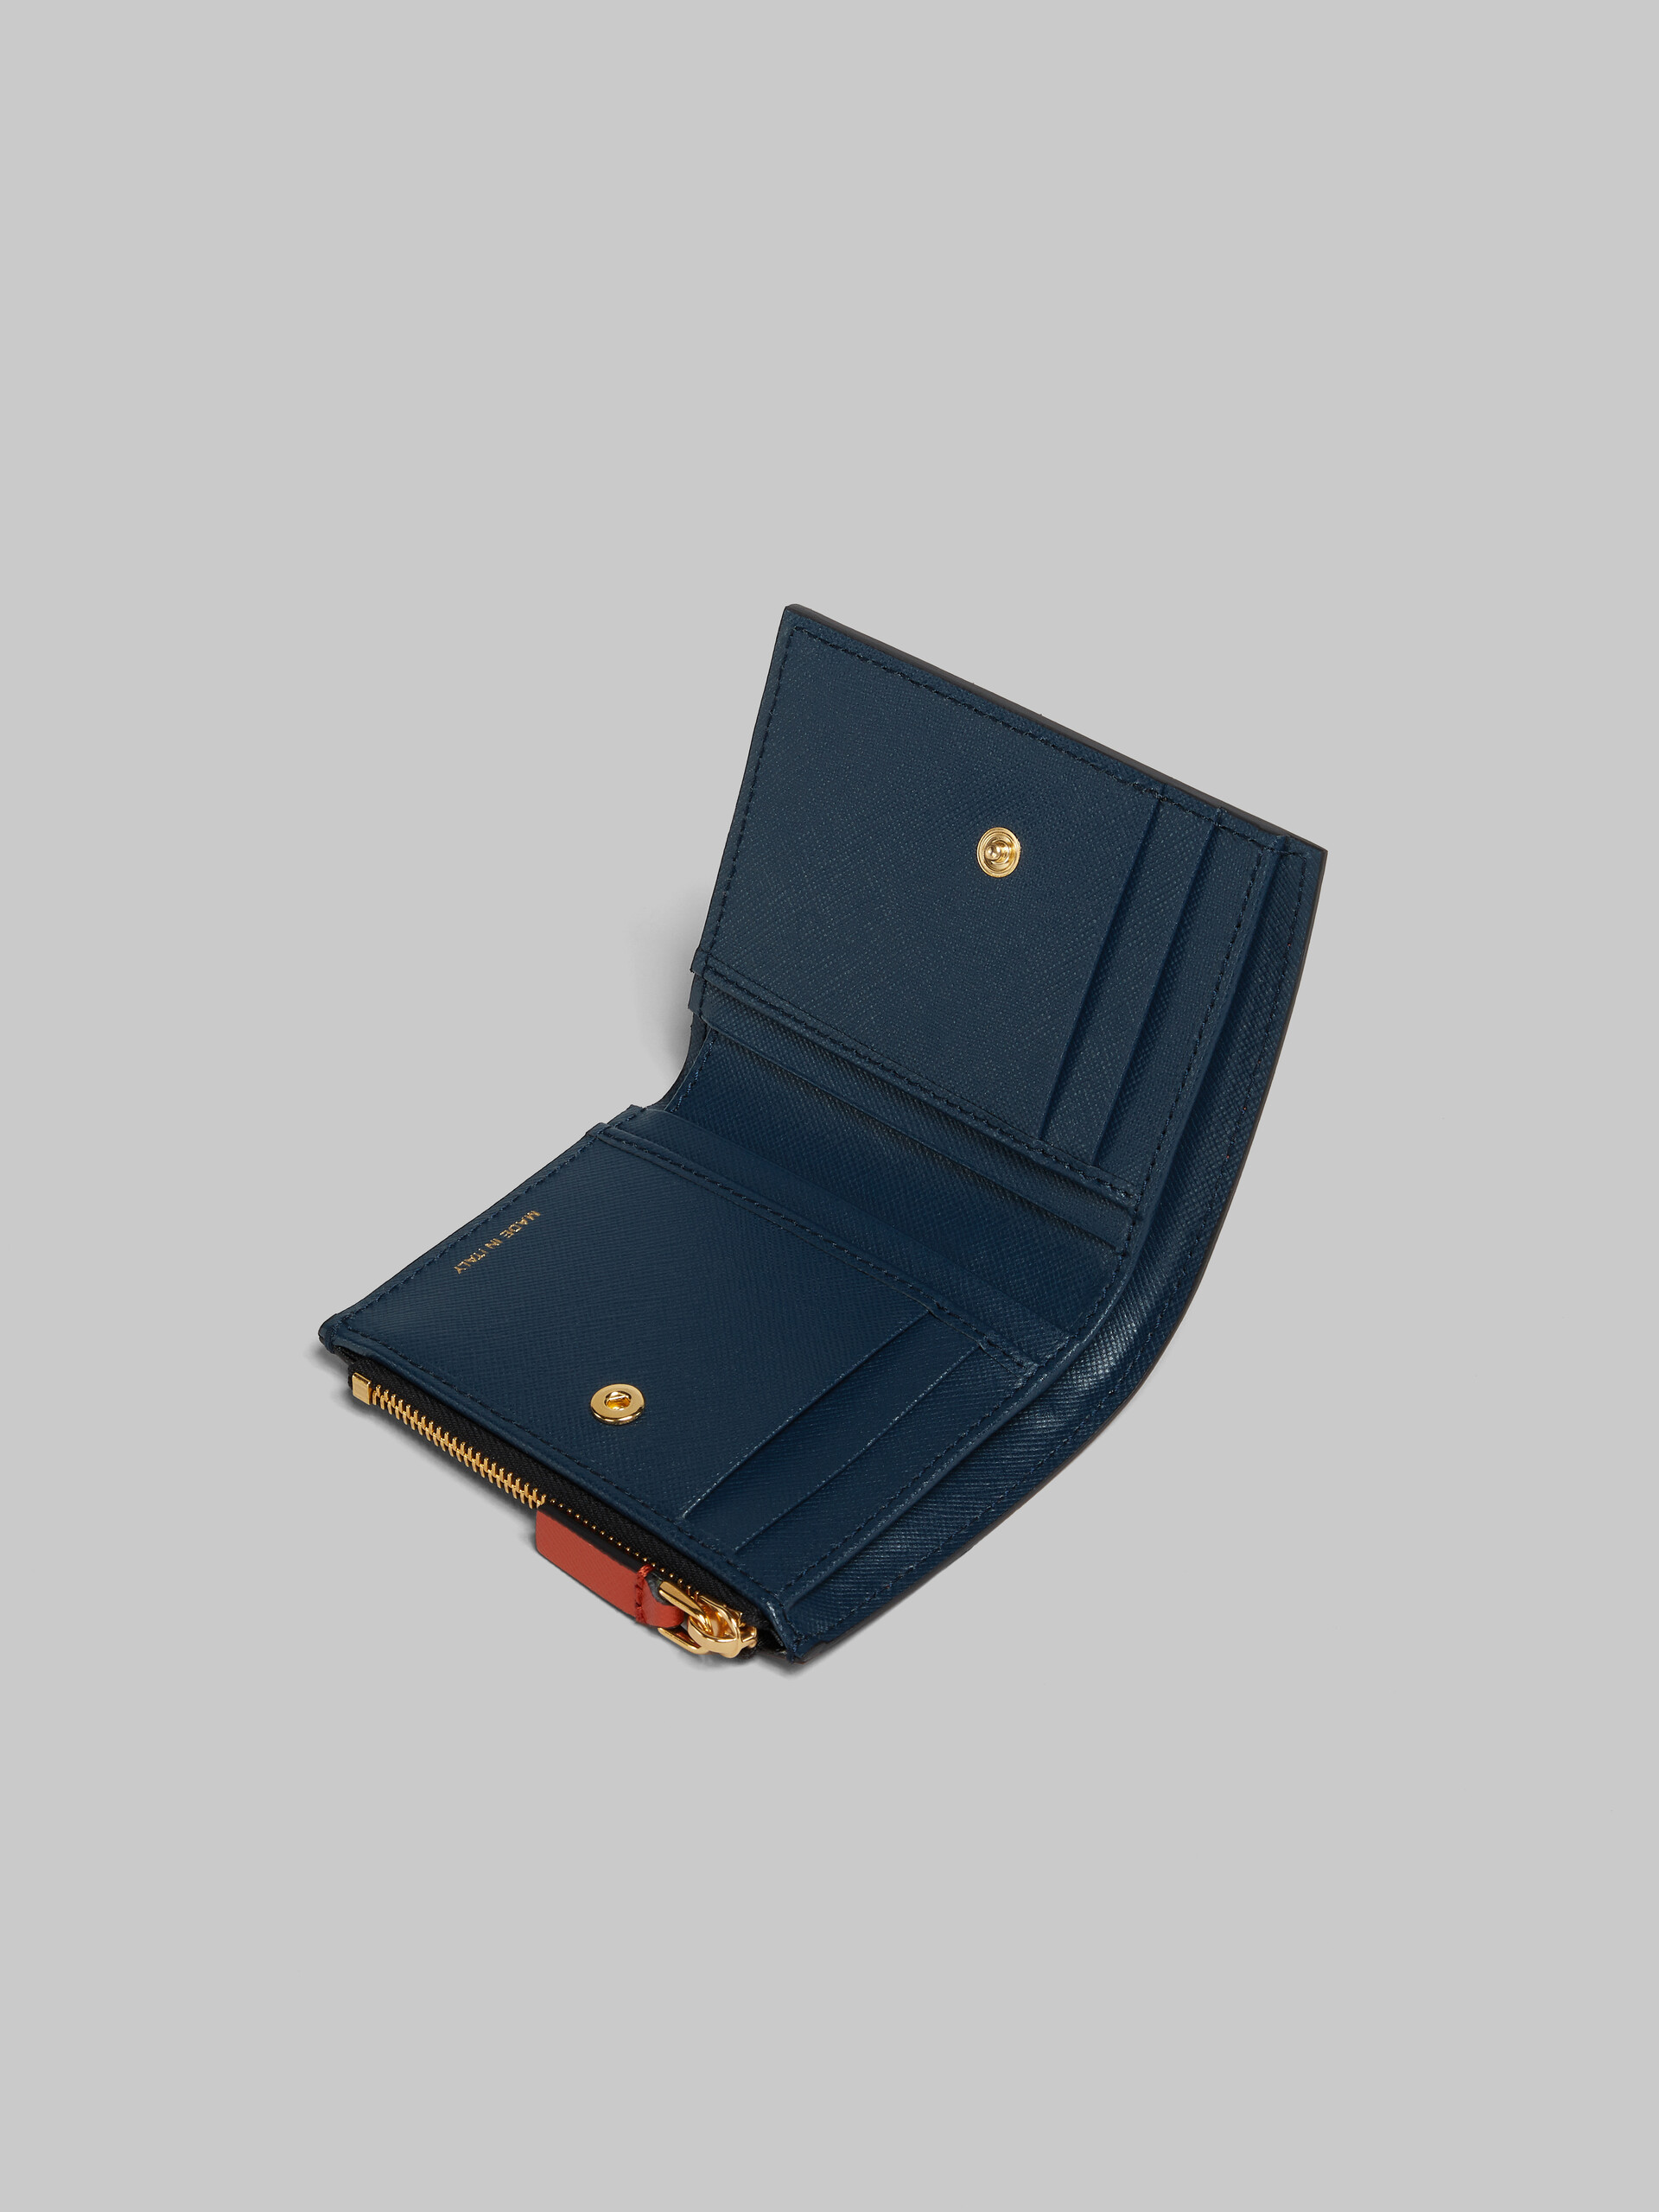 Orange cream and deep blue saffiano leather bifold wallet - Wallets - Image 4